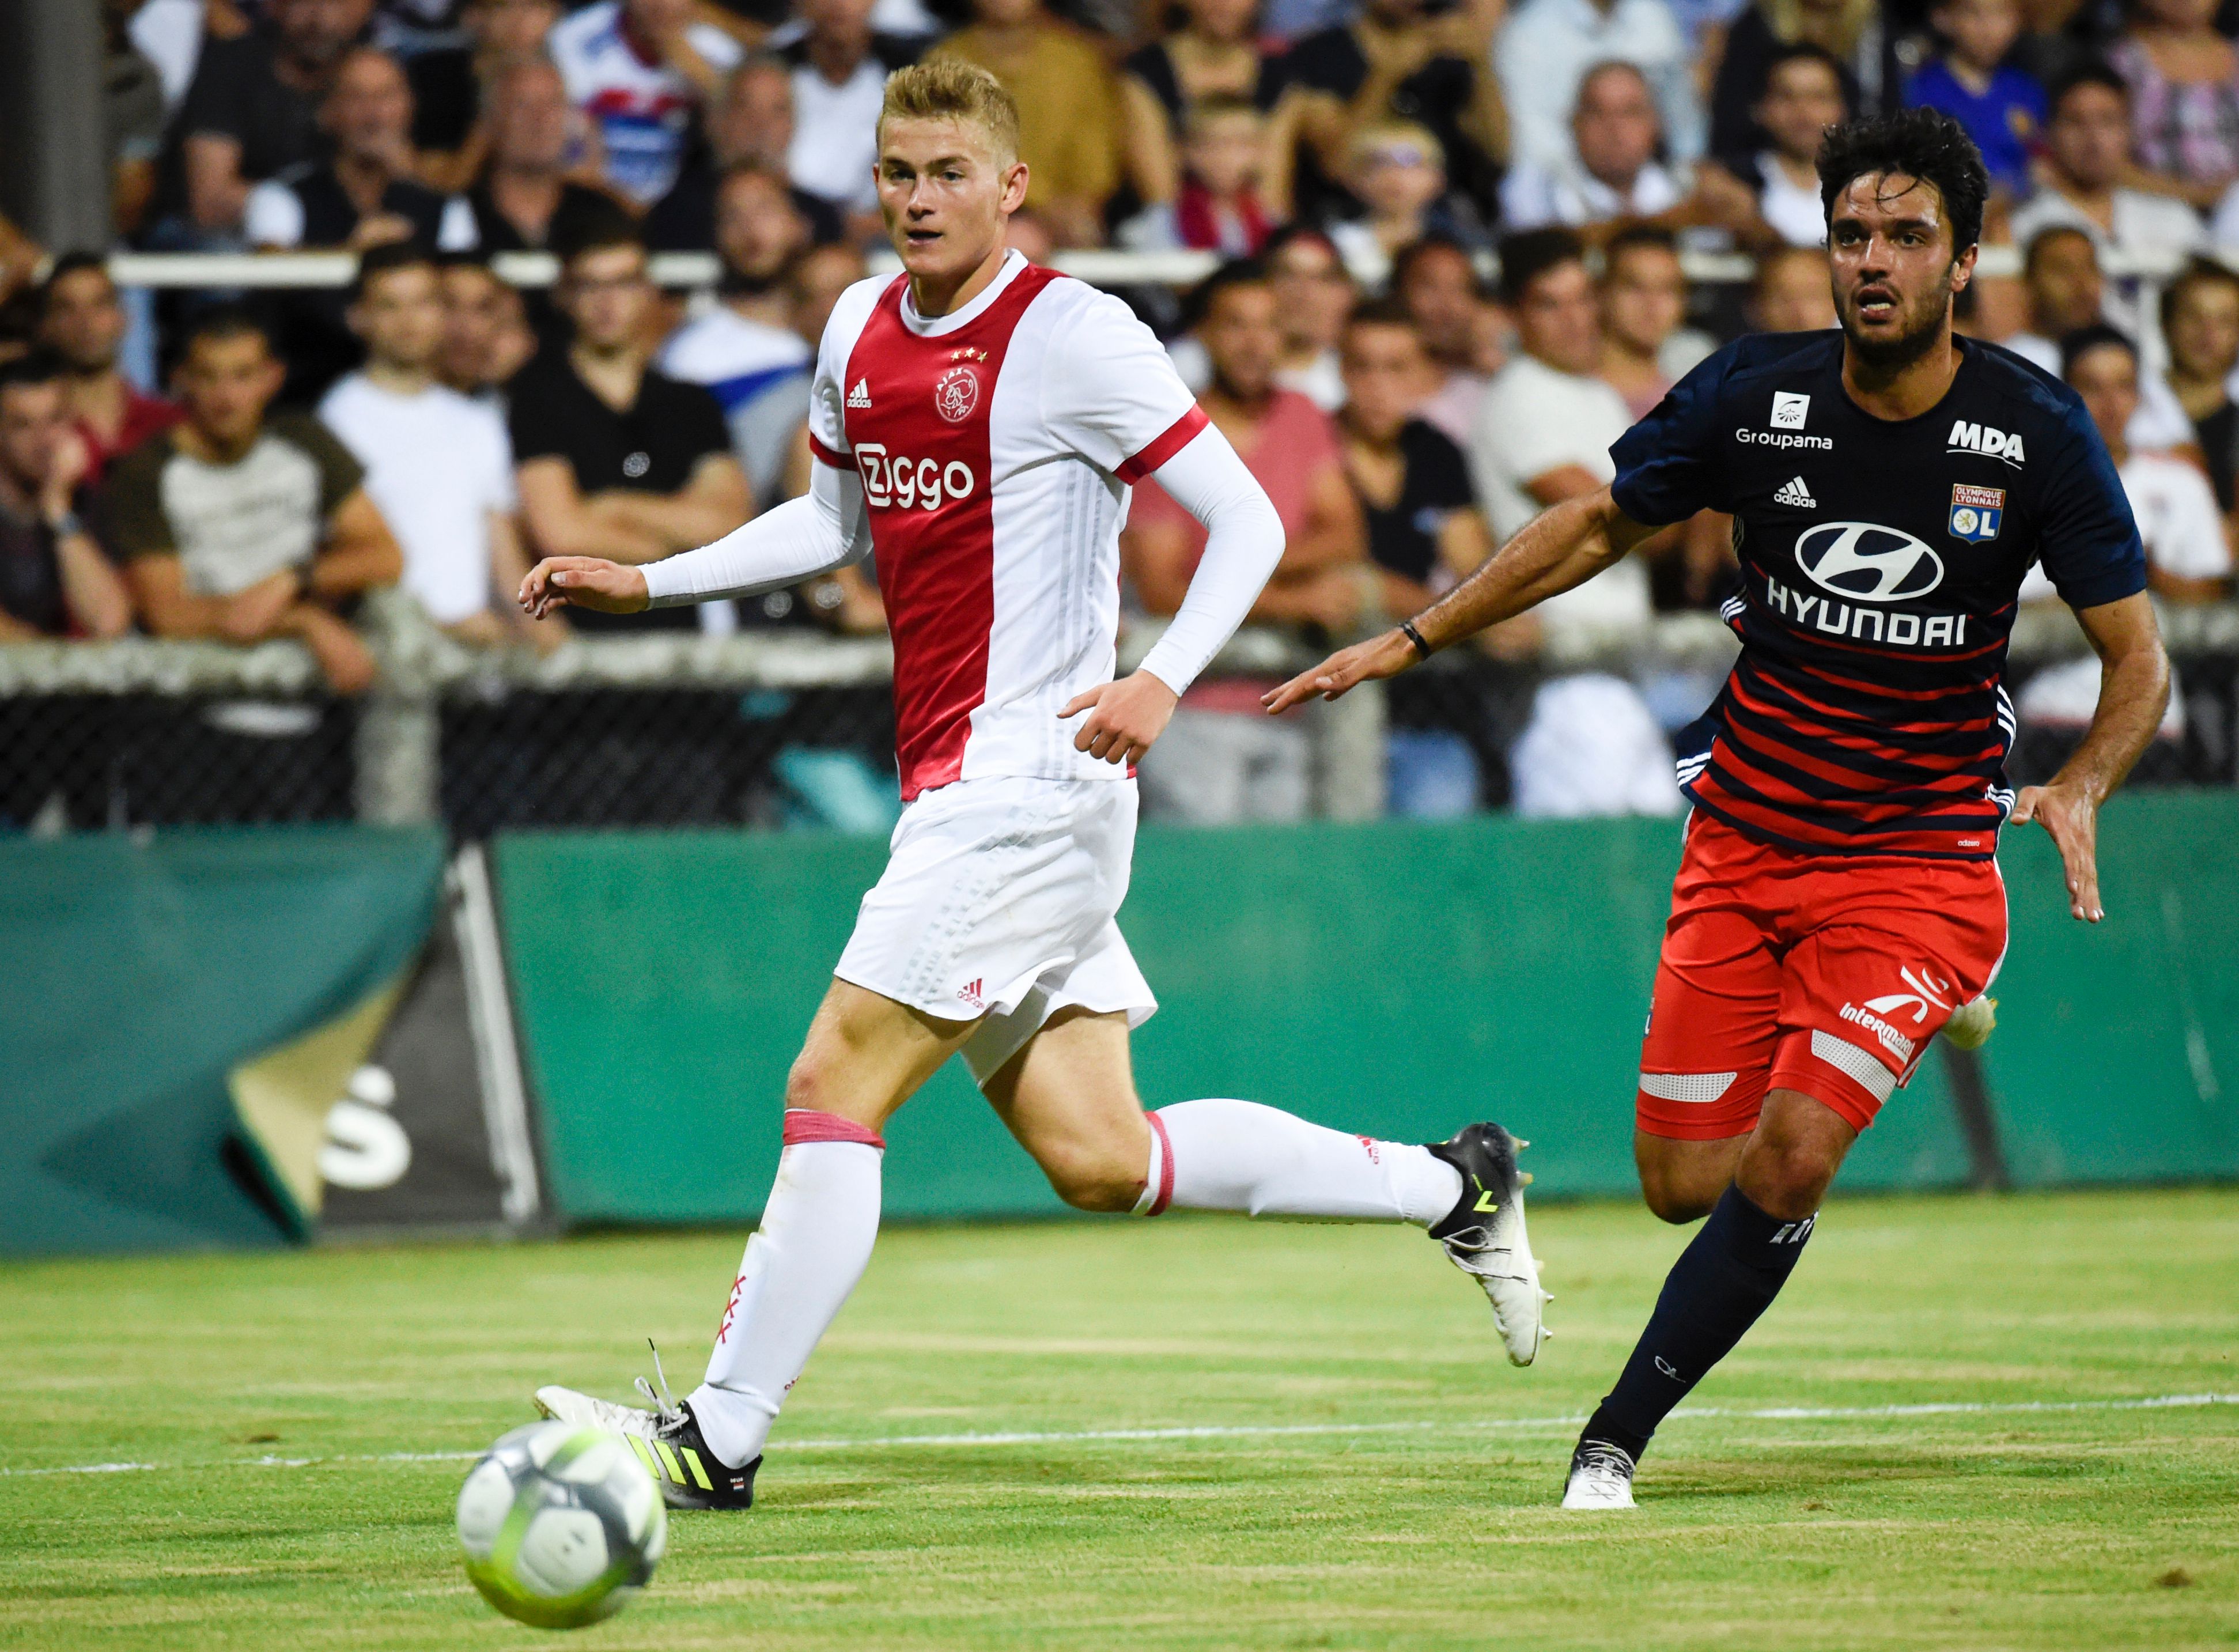 Ajax defender Matthijs de Ligt (L) vies with Lyon's French midfielder Clement Grenier during a friendly football match between Olympique Lyonnais and Ajax Amsterdam on July 18, 2017 at the Pierre Rajon stadium in Bourgoin-Jallieu.  / AFP PHOTO / JEAN-PHILIPPE KSIAZEK        (Photo credit should read JEAN-PHILIPPE KSIAZEK/AFP/Getty Images)